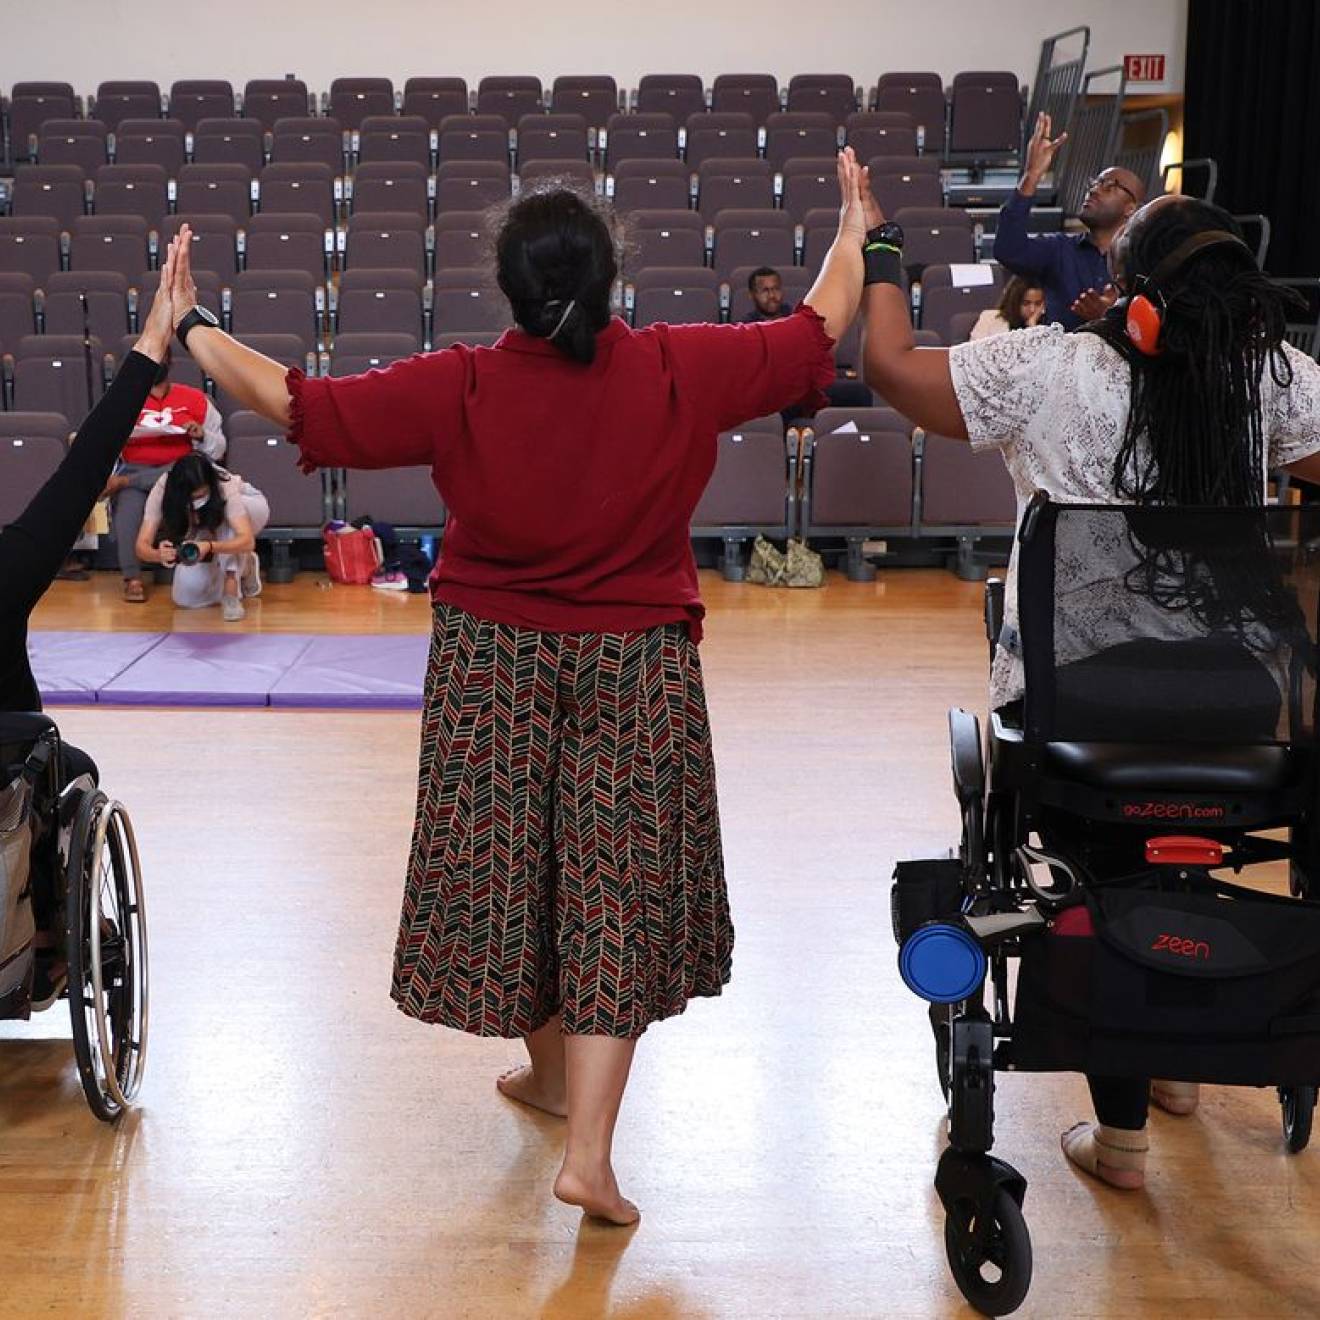 Three disabled dancers, photographed from behind, touch hands while raising their arms.